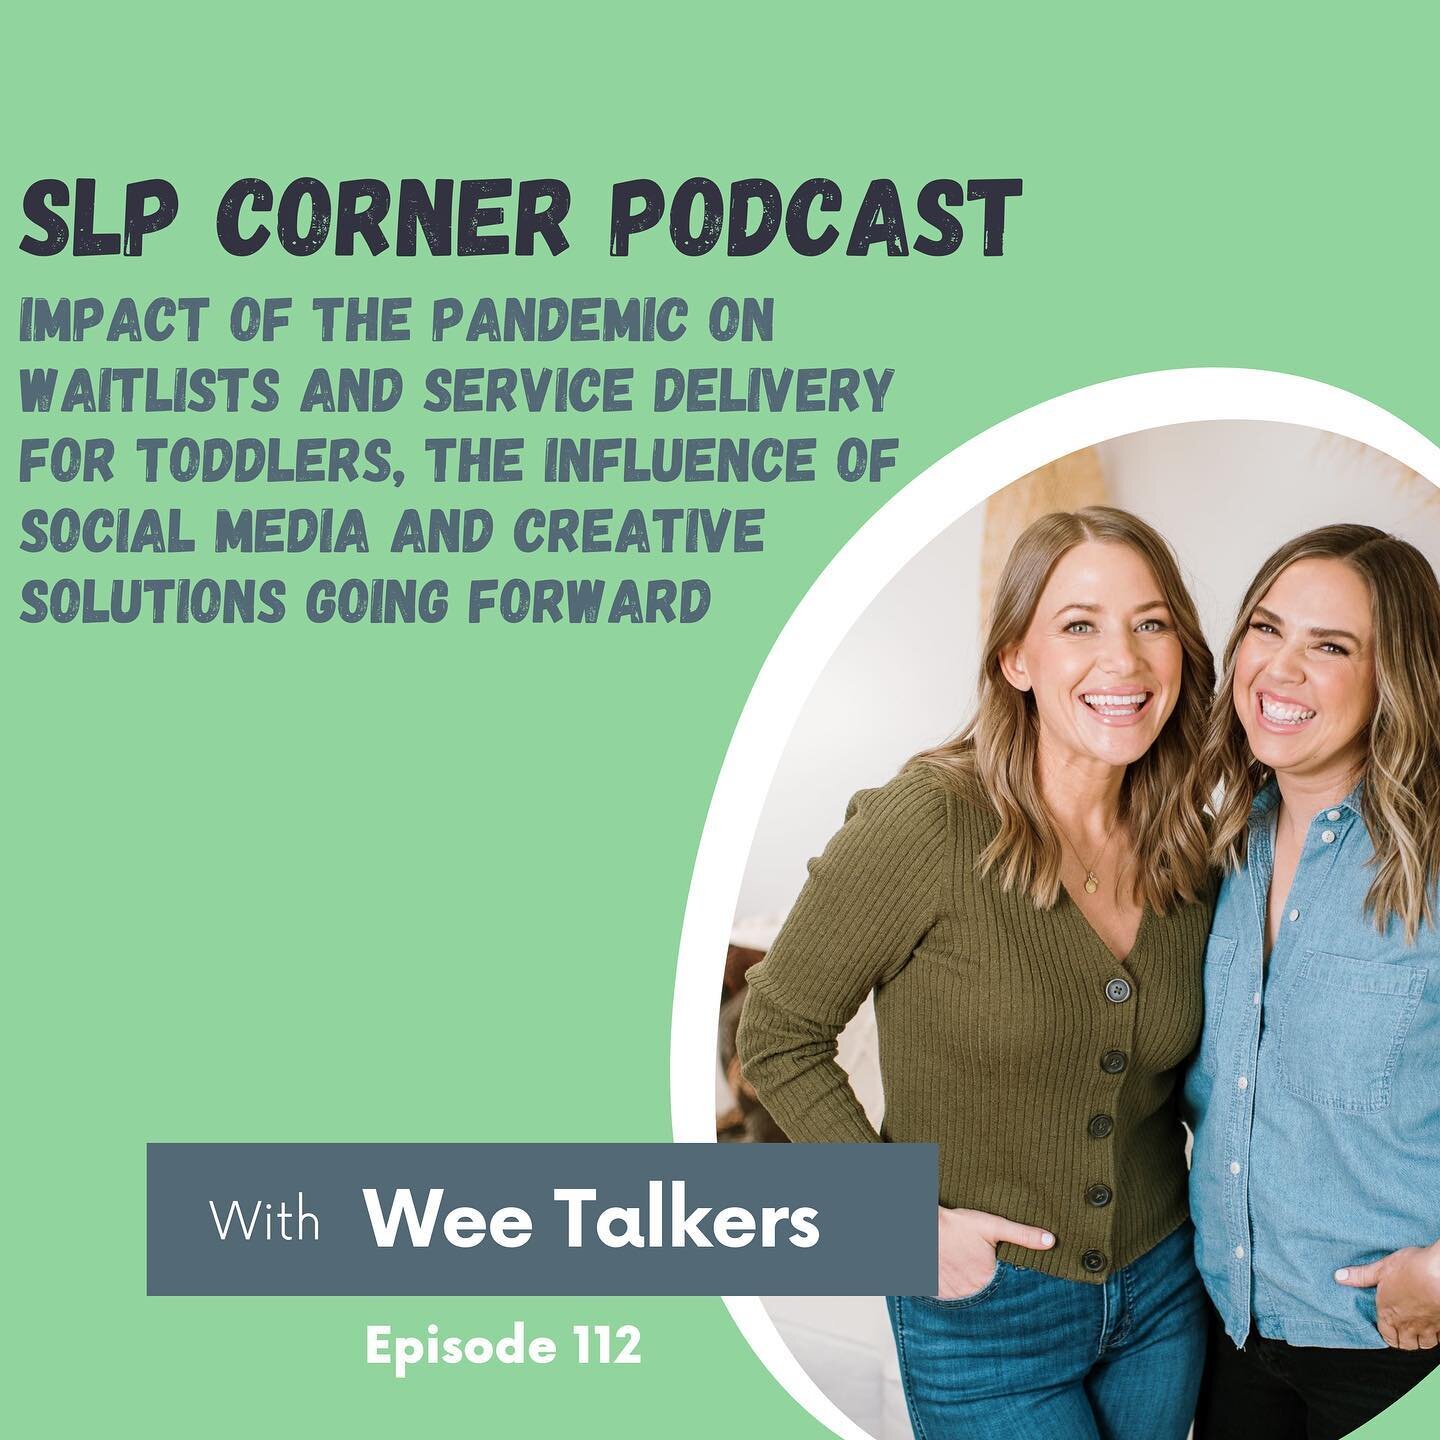 Carly &amp; Katie from @weetalkers are on the podcast this week! &thinsp;
&thinsp;
So excited to have them on. Loved chatting with them.🤎&thinsp;
&thinsp;
We are talking all about the impacts of the pandemic and solutions moving forward. &thinsp;
&t